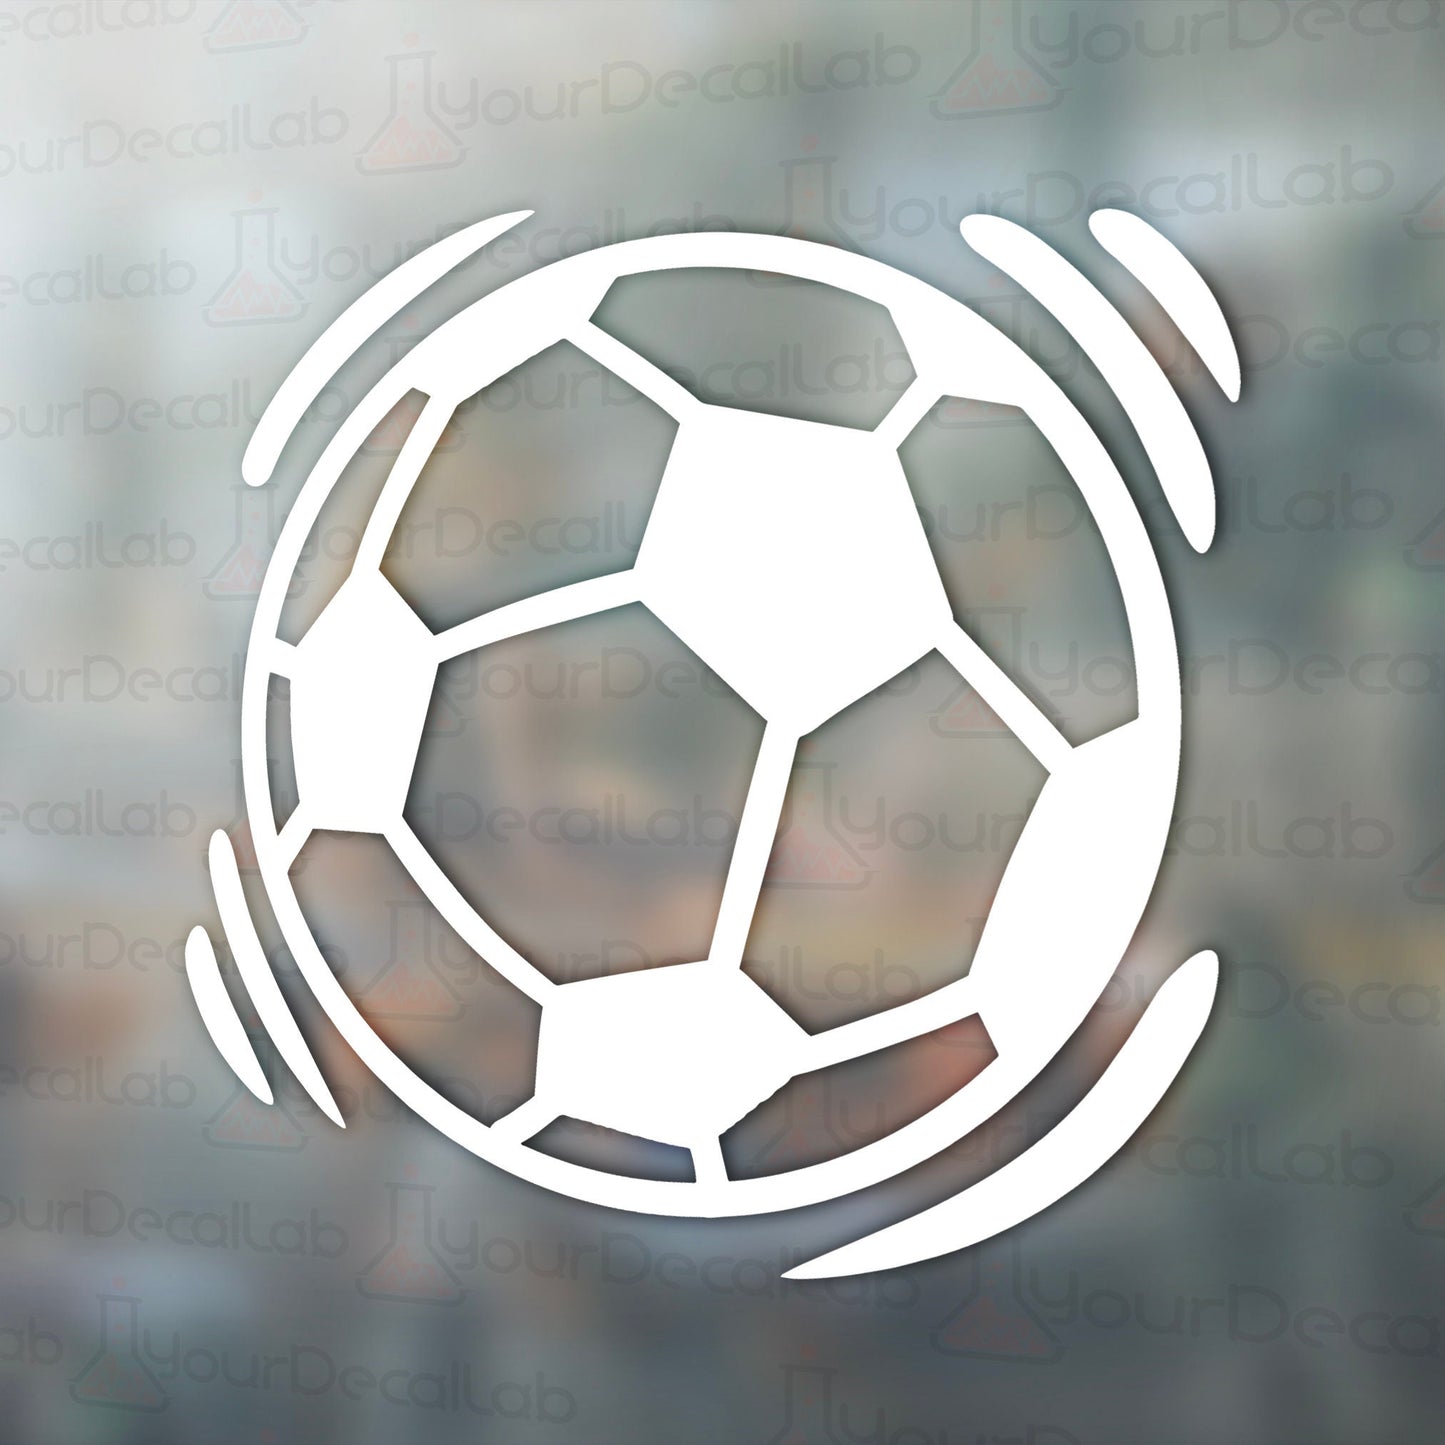 a white soccer ball on a blurry background